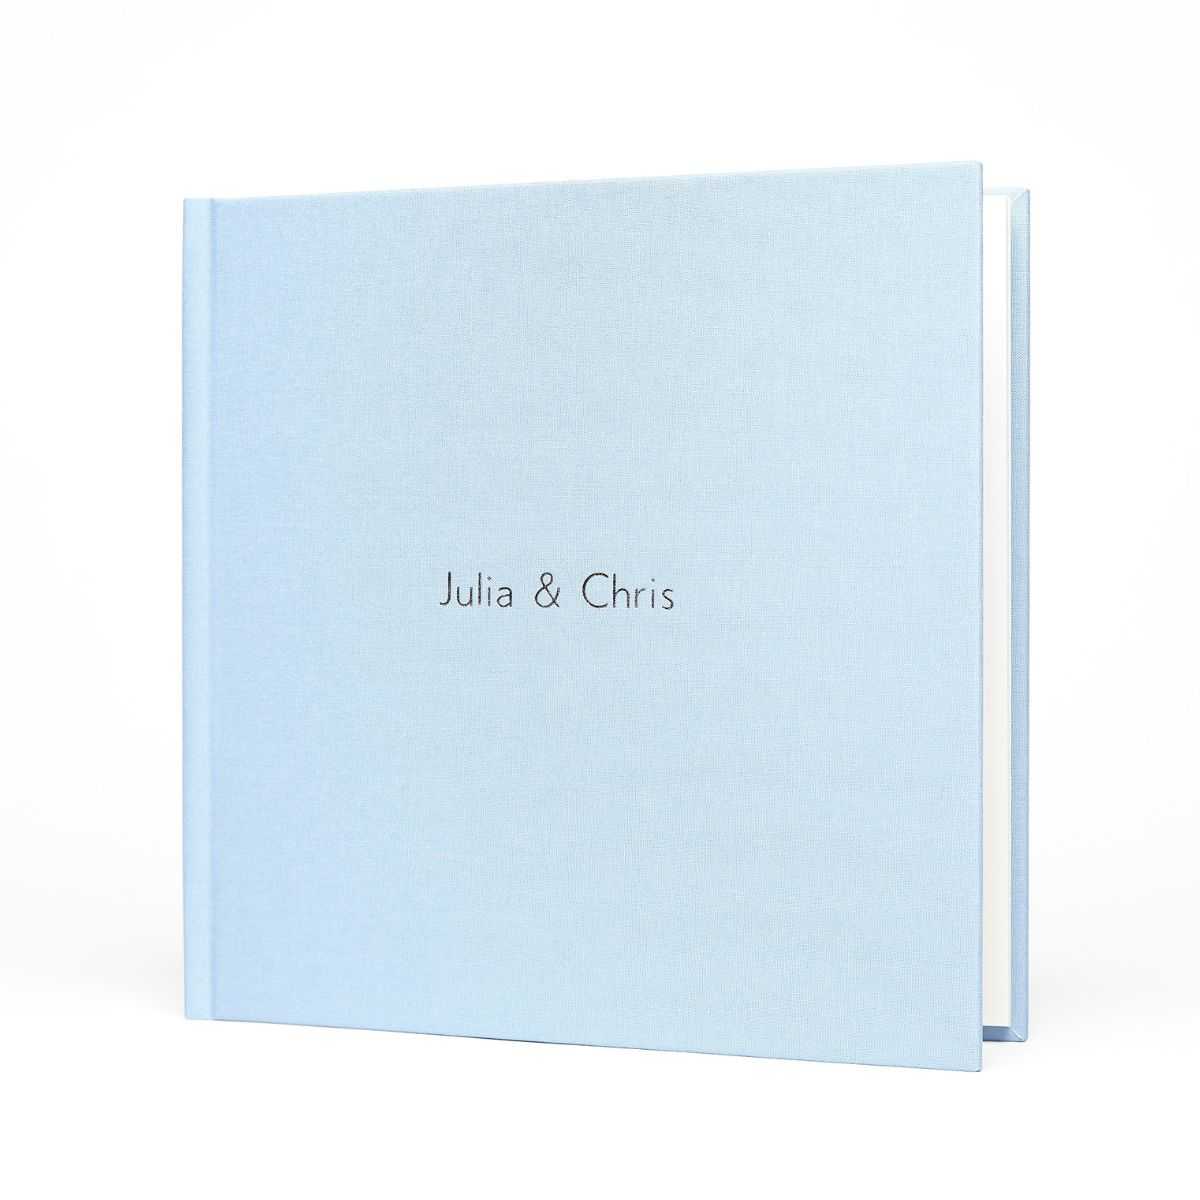 The perfect wedding photo book